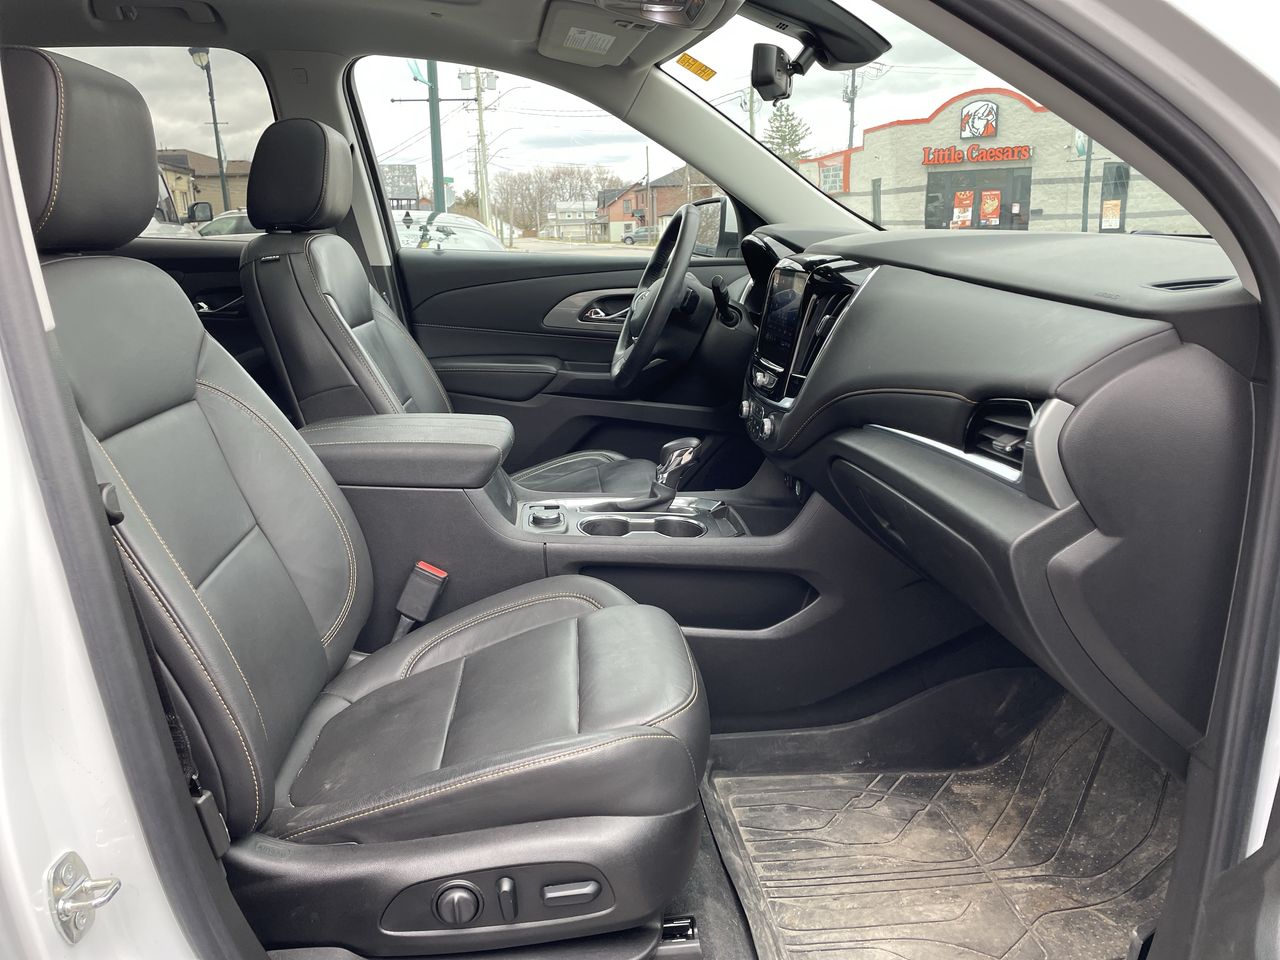 2021 Chevrolet Traverse - 21525A Full Image 17